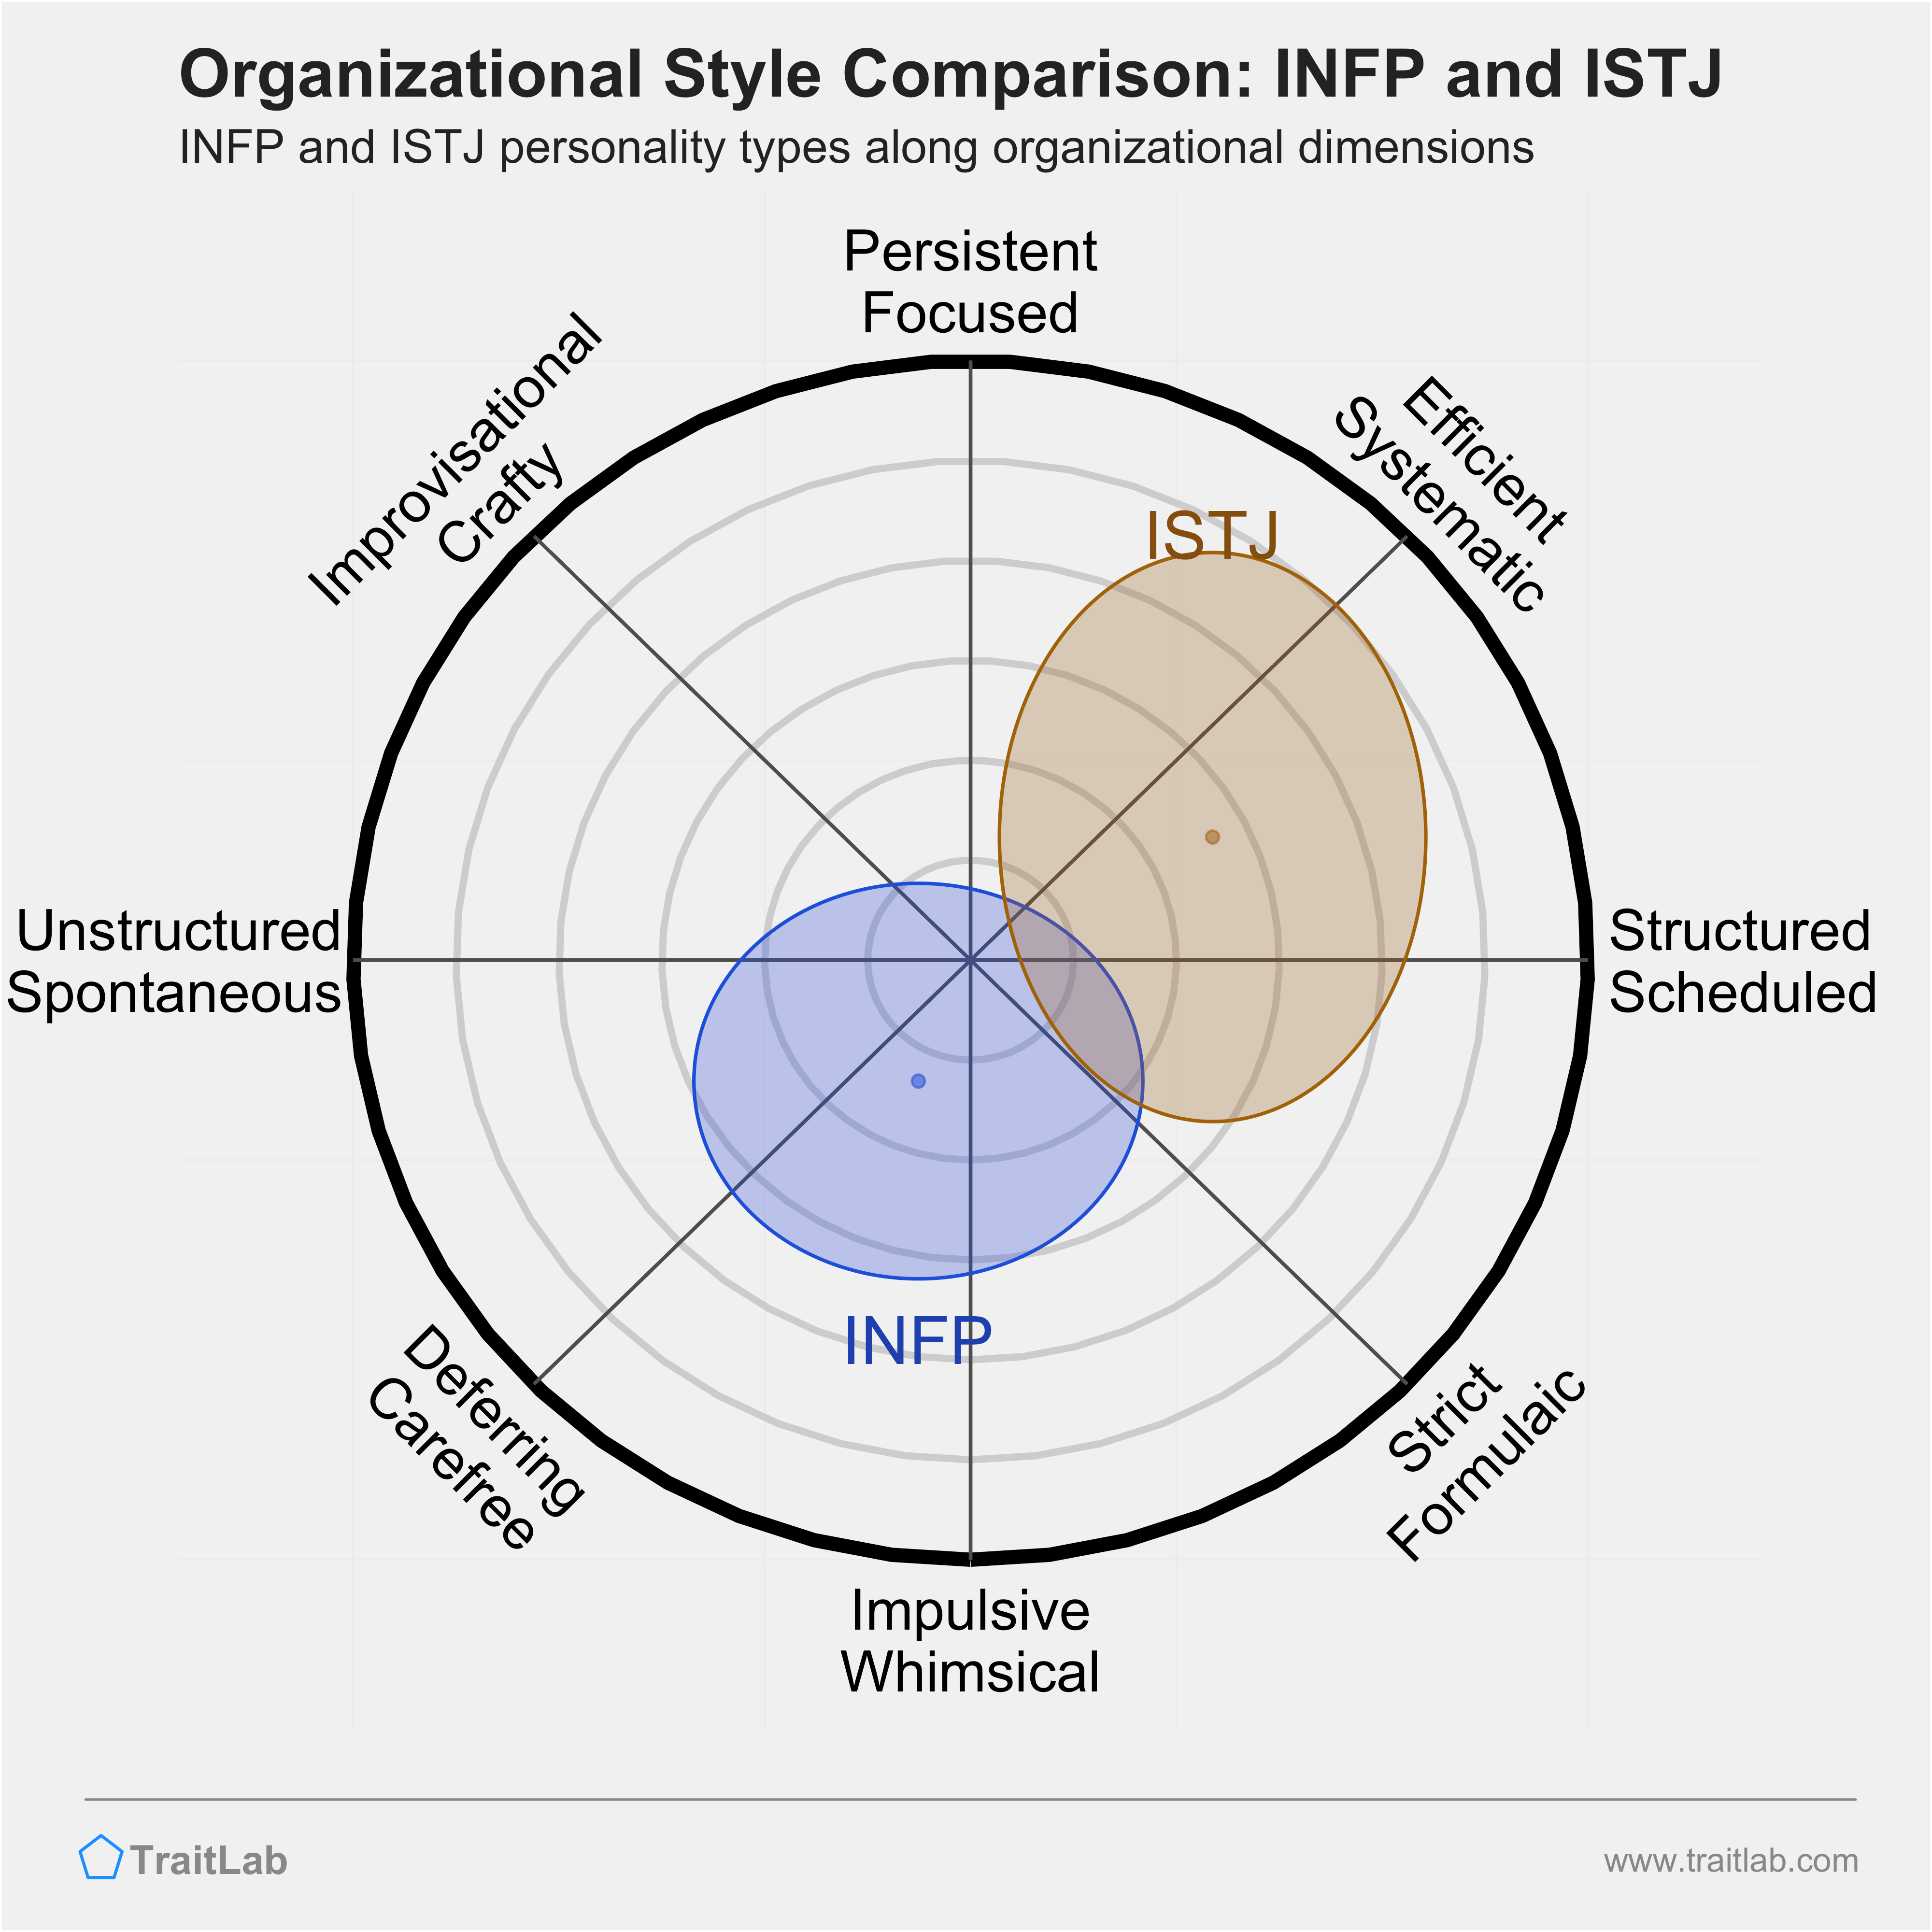 INFP and ISTJ comparison across organizational dimensions